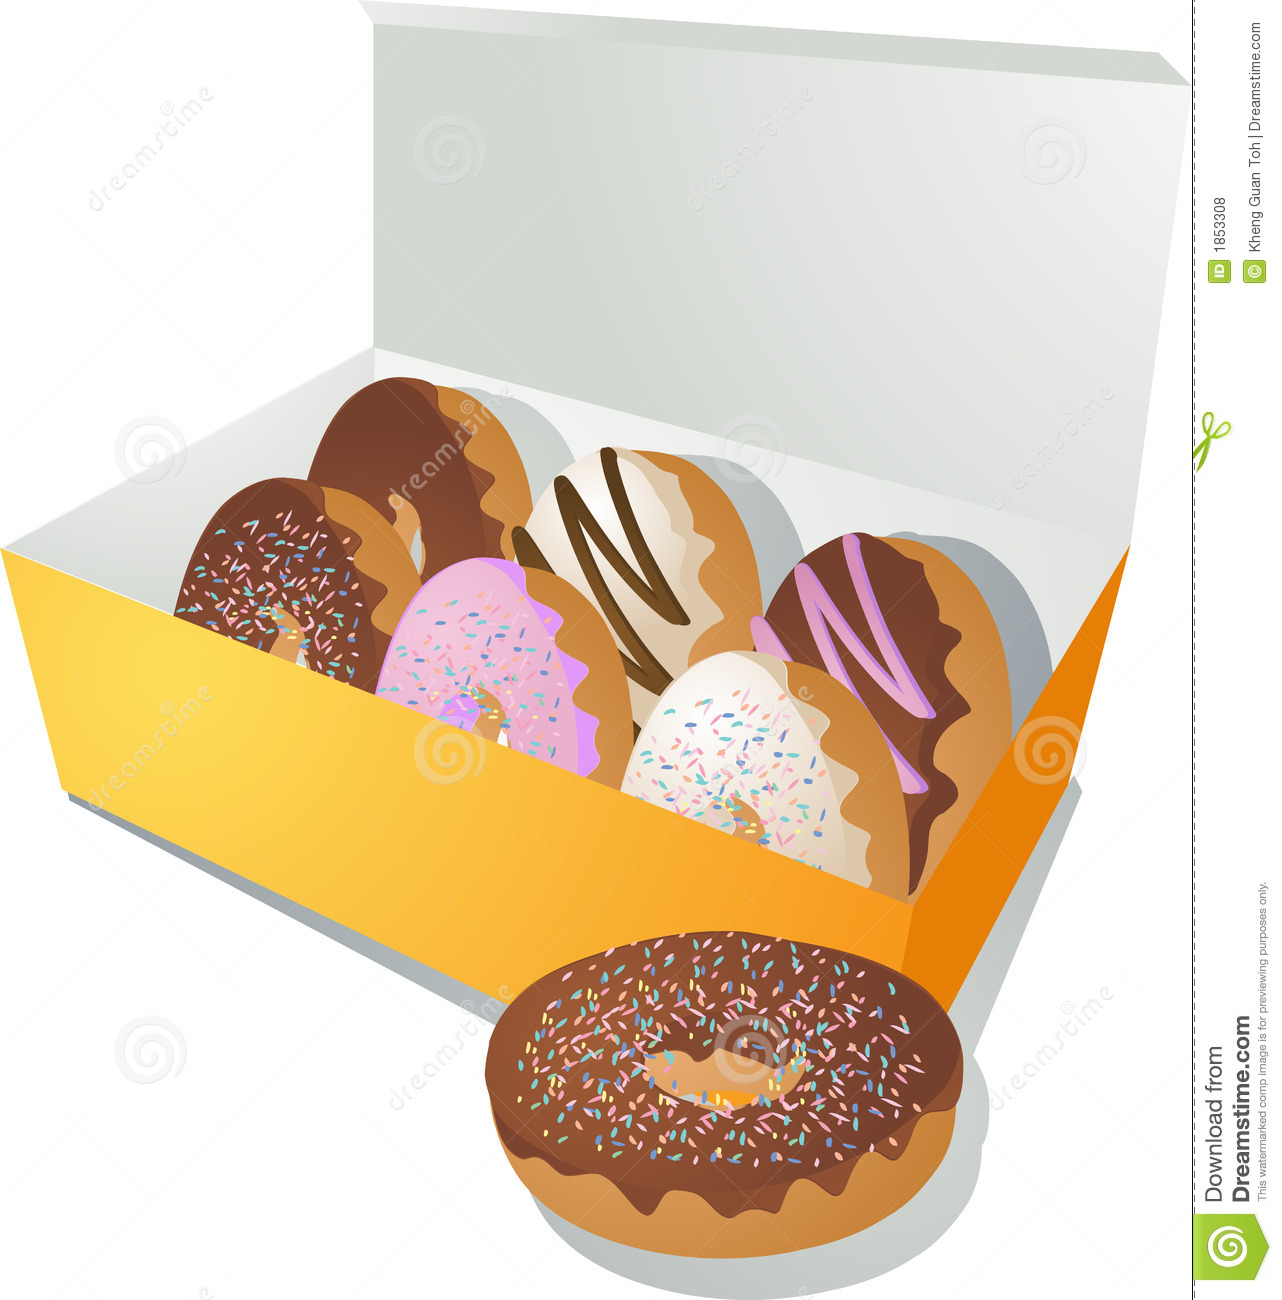 Box Of Donuts Clipart Donuts In A Box Royalty Free